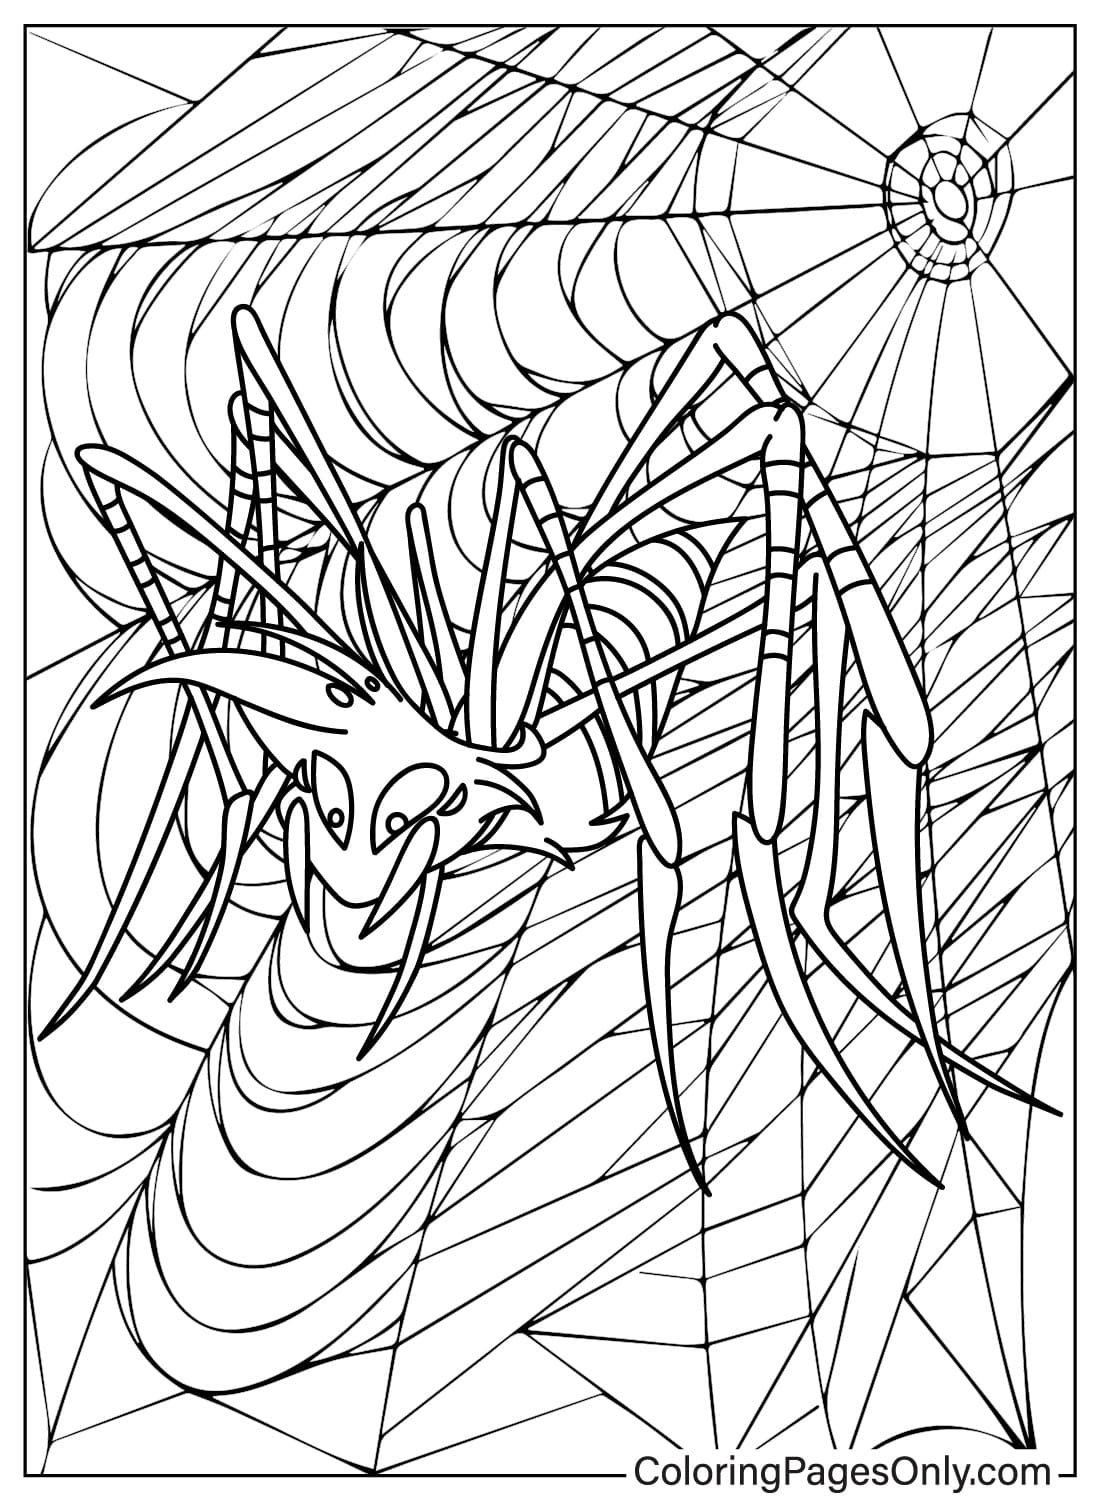 Angel Dust Coloring Page Transform into a Spider from Angel Dust